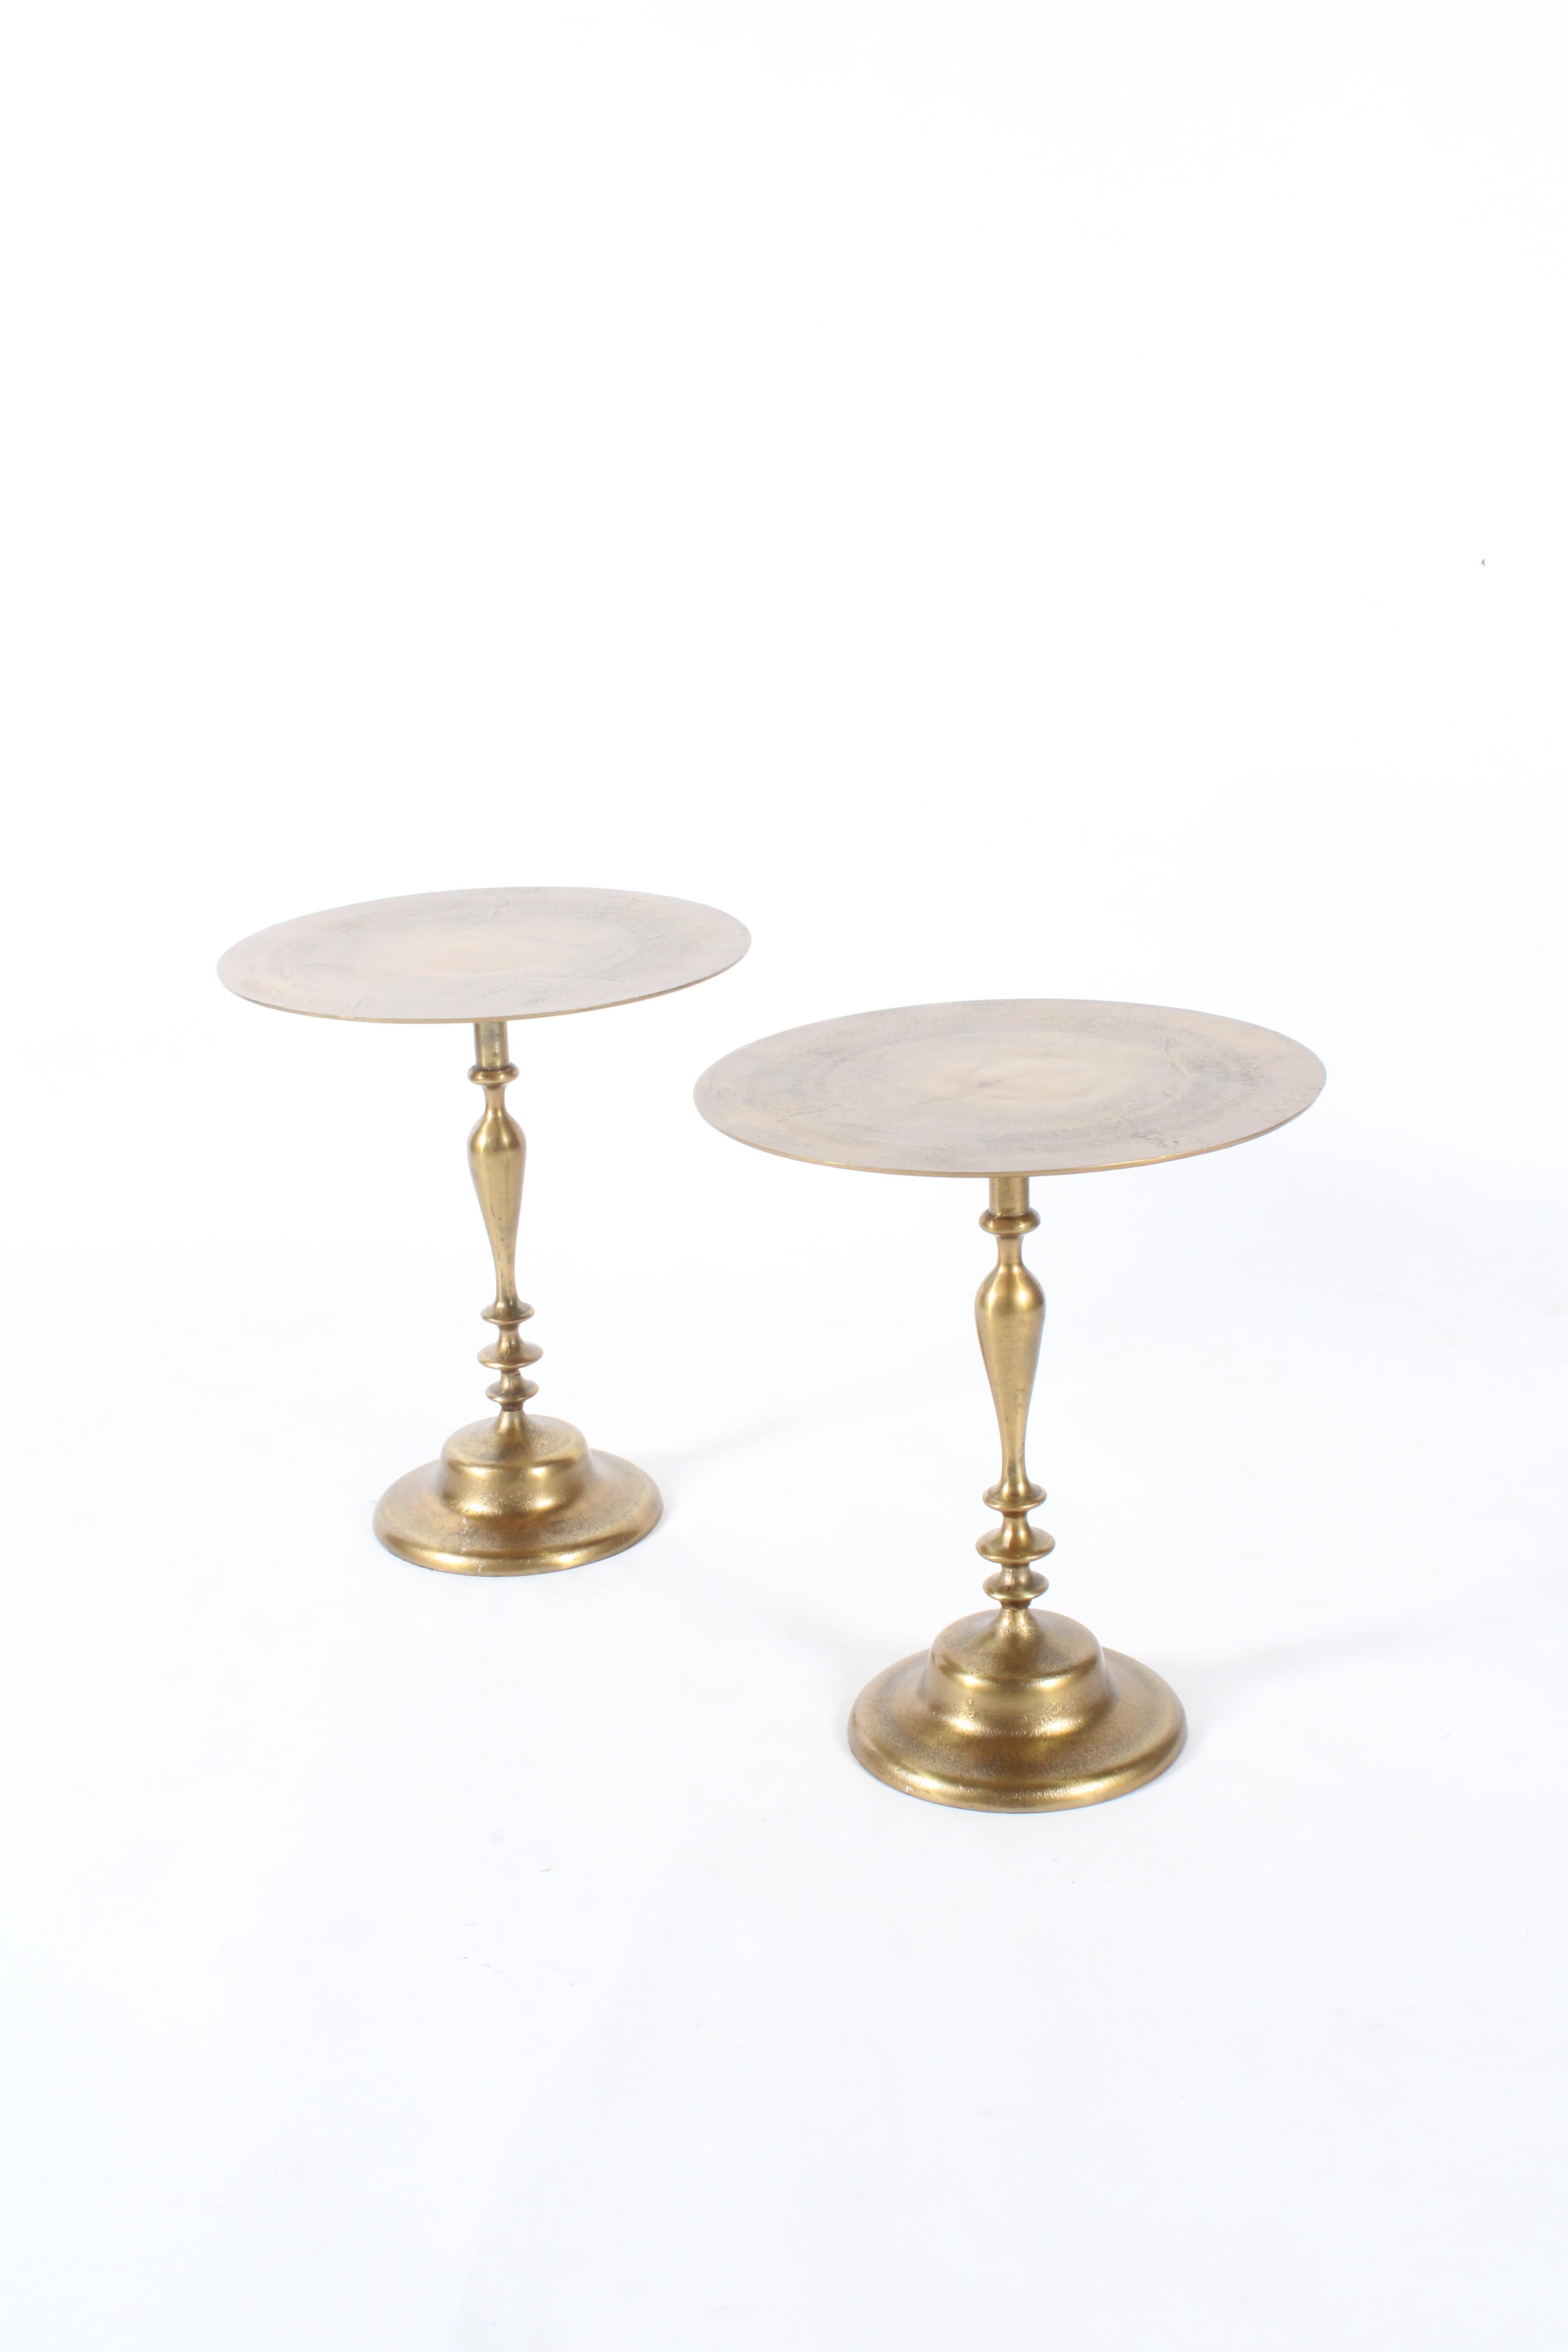 Historic Side Tables From The Ritz Hotel Paris *Free Worldwide Delivery For Sale 2